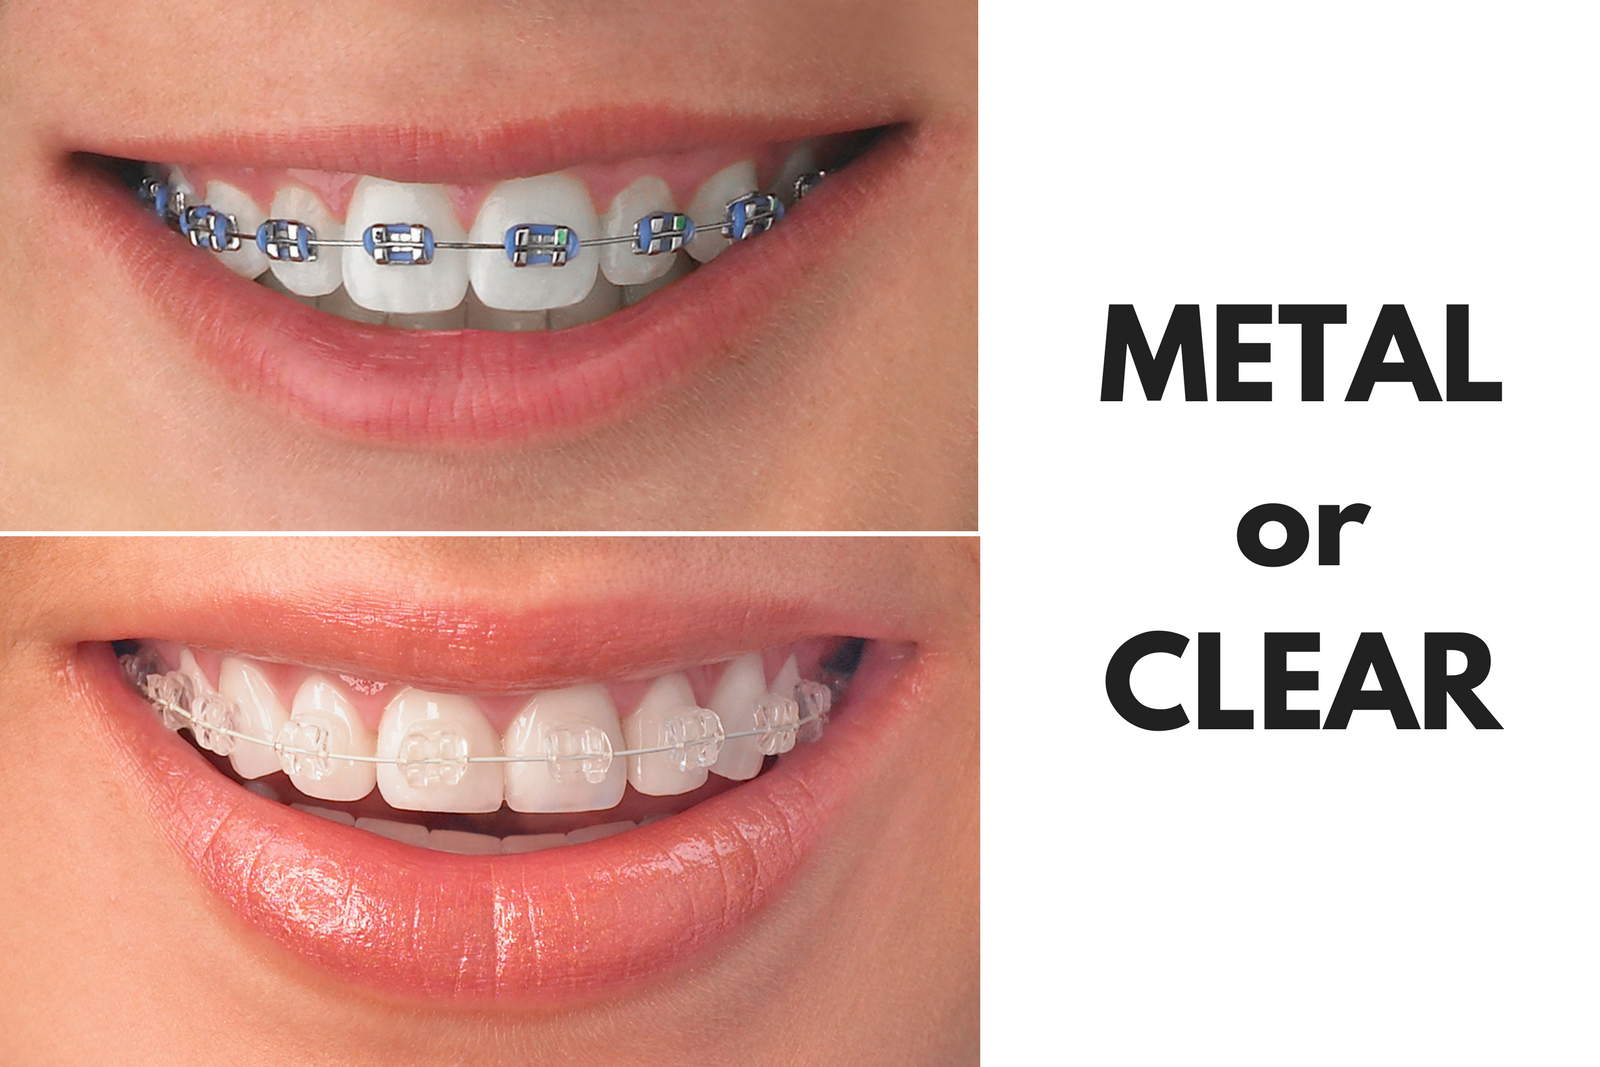 Ask Your El Paso Dentist: Should I Get Metal or Clear Braces?